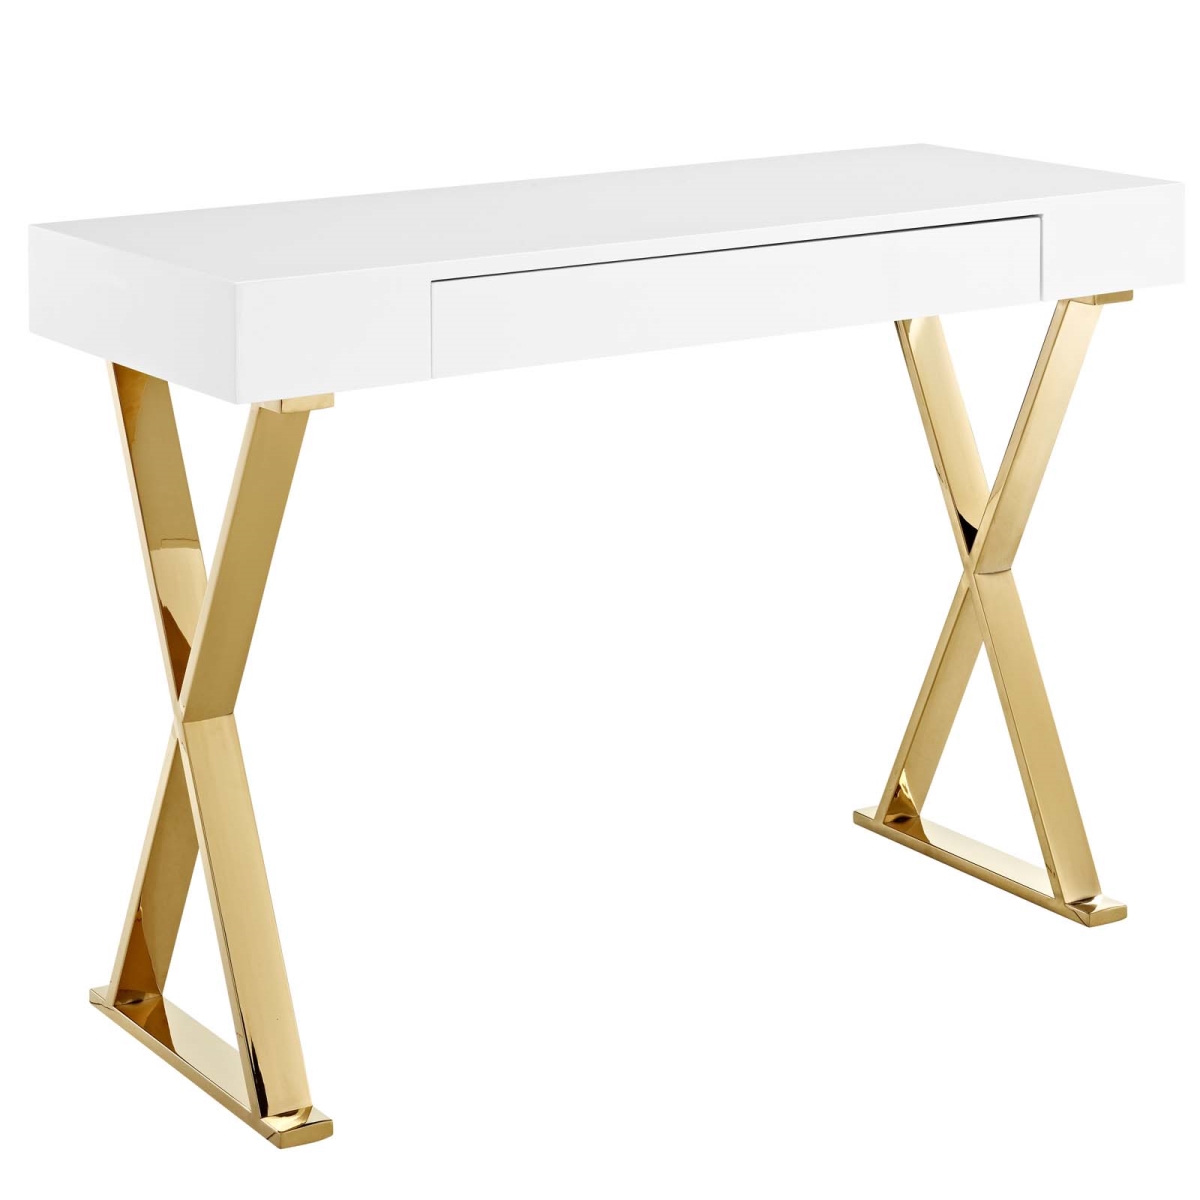 Eei-3032-whi Sector Console Table - White Gold, 29 X 16 X 40 In.